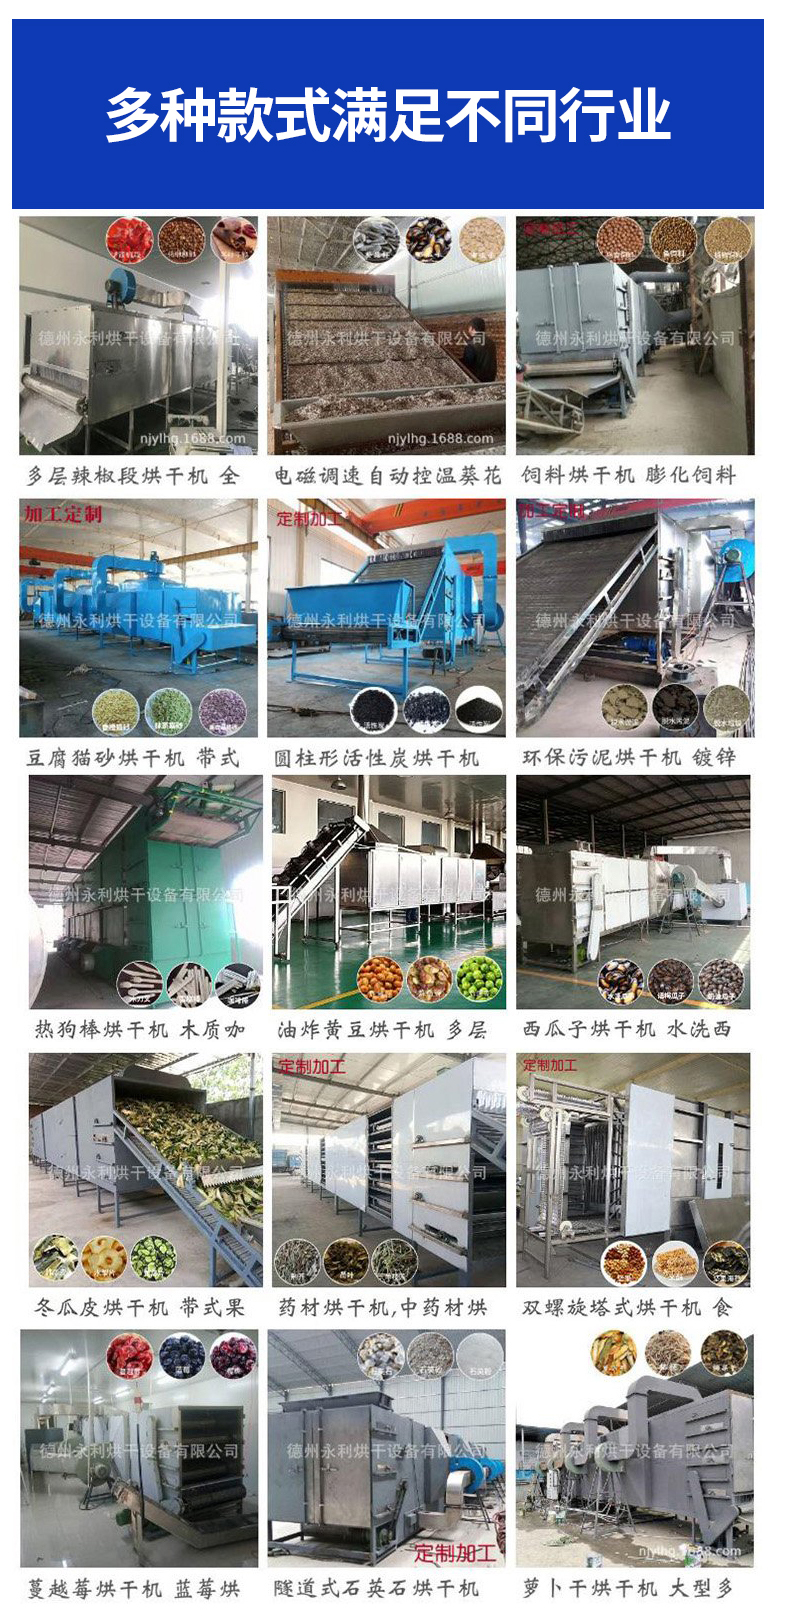 Yongli multi-layer belt drying oven, cyclic reciprocating mesh belt drying oven, oven type drying equipment customized by the manufacturer